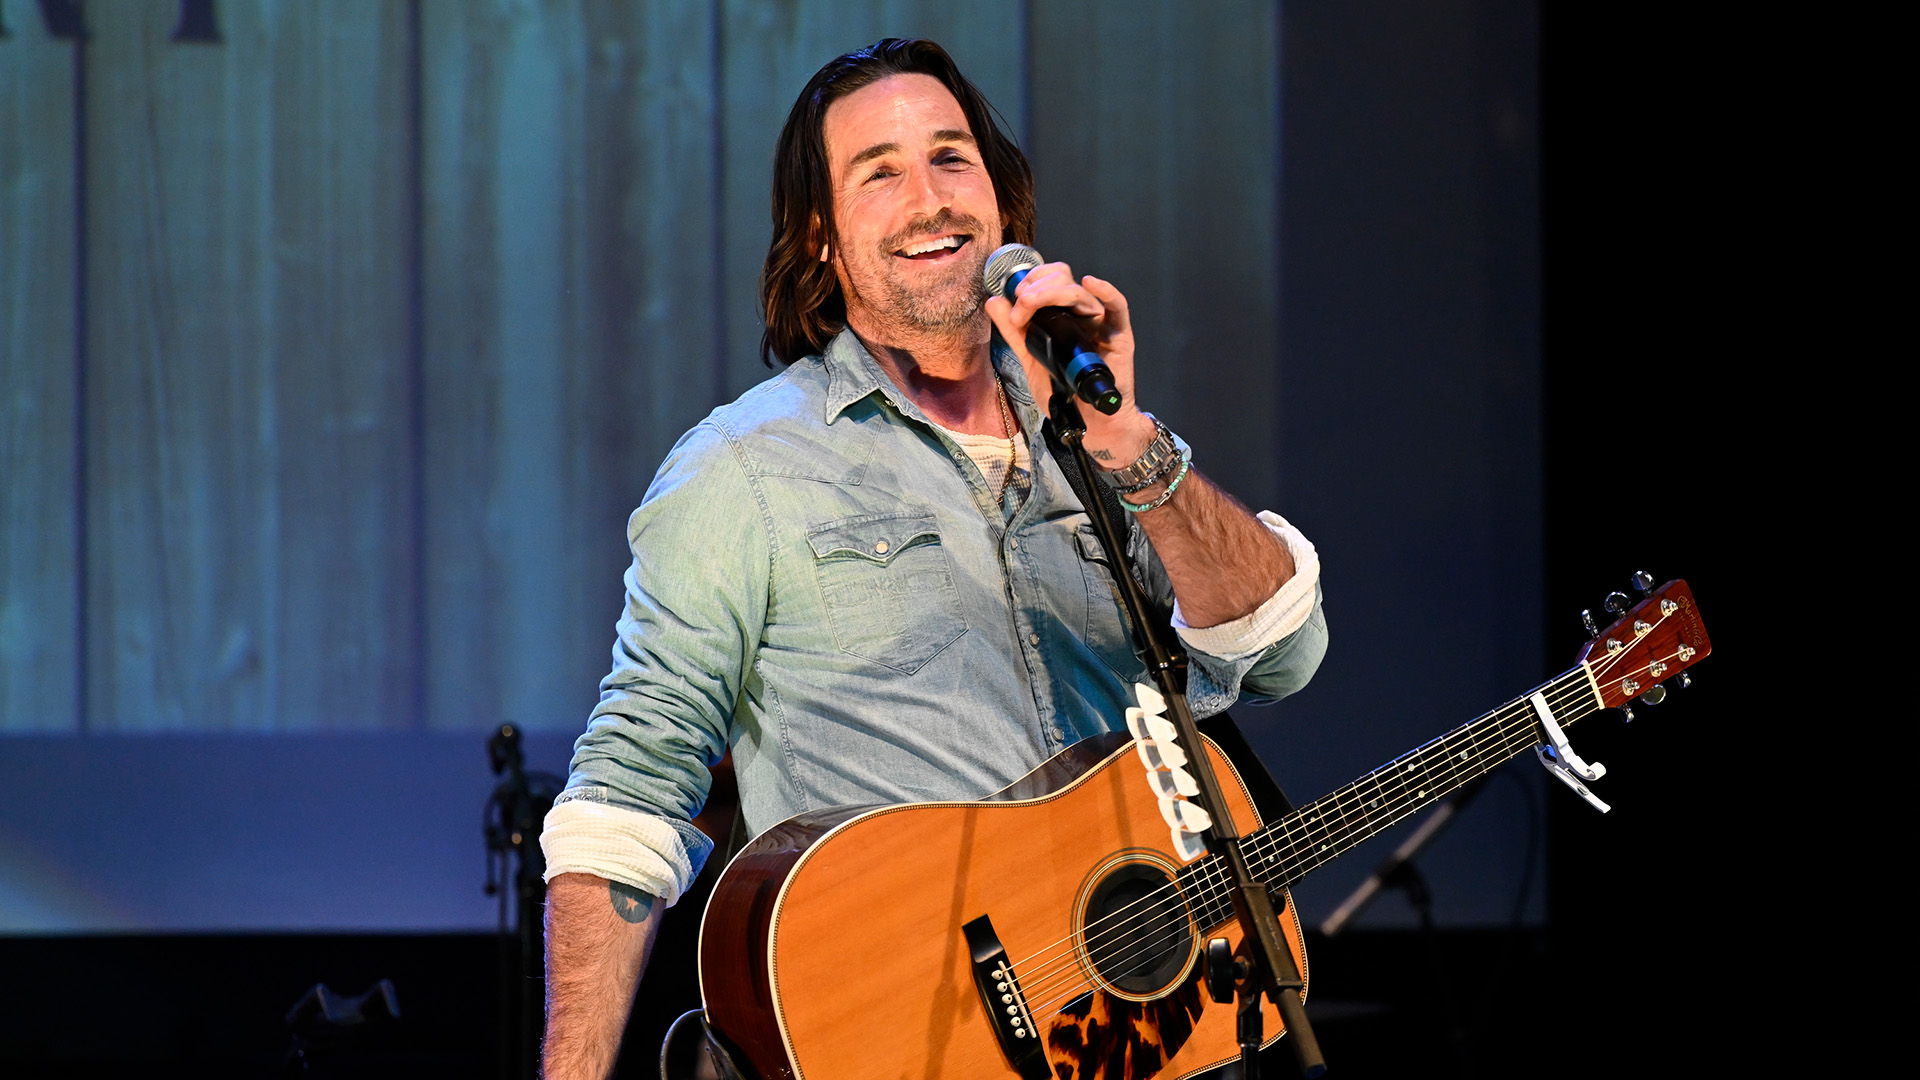 Singer Jake Owen performs on Day 2 of Live In The Vineyard Goes Country at the Uptown Theatre on April 26, 2023 in Napa, California.